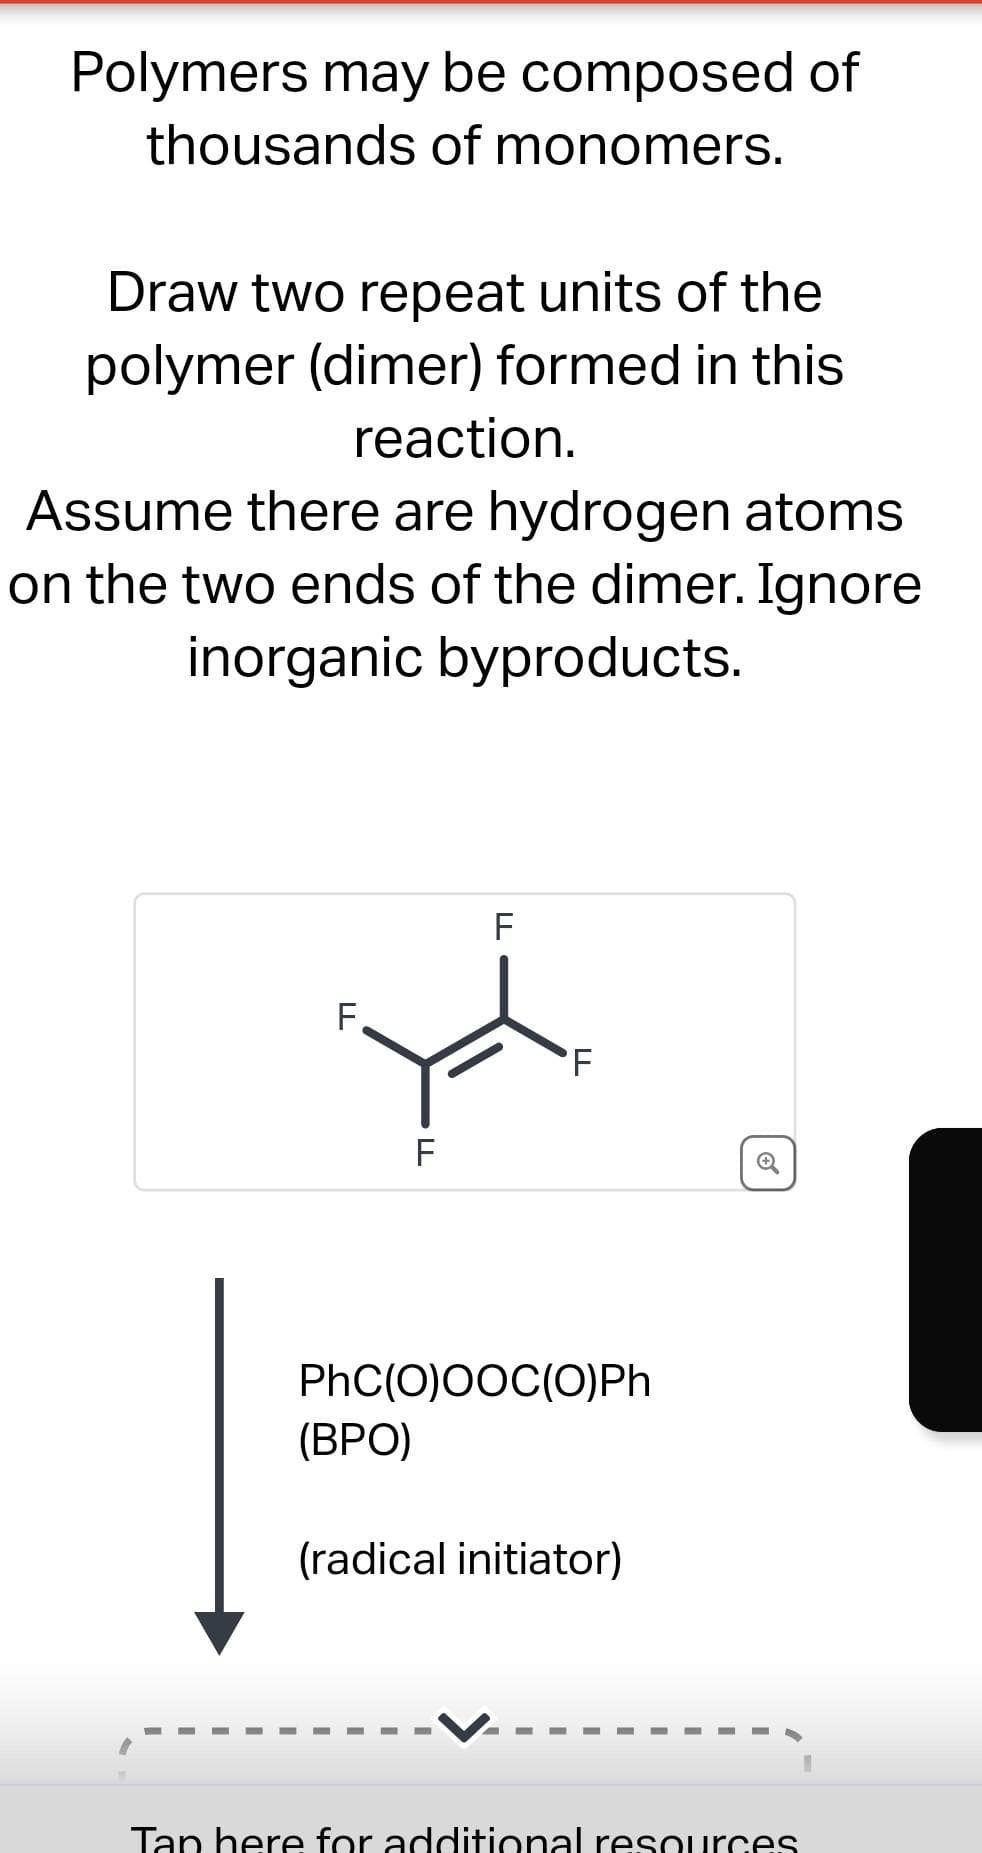 Polymers may be composed of
thousands of monomers.
Draw two repeat units of the
polymer (dimer) formed in this
reaction.
Assume there are hydrogen atoms
on the two ends of the dimer. Ignore
inorganic byproducts.
F
LL
LL
(BPO)
F
F
PhC(O)OOC(O)Ph
(radical initiator)
Ⓡ
Tap here for additional resources